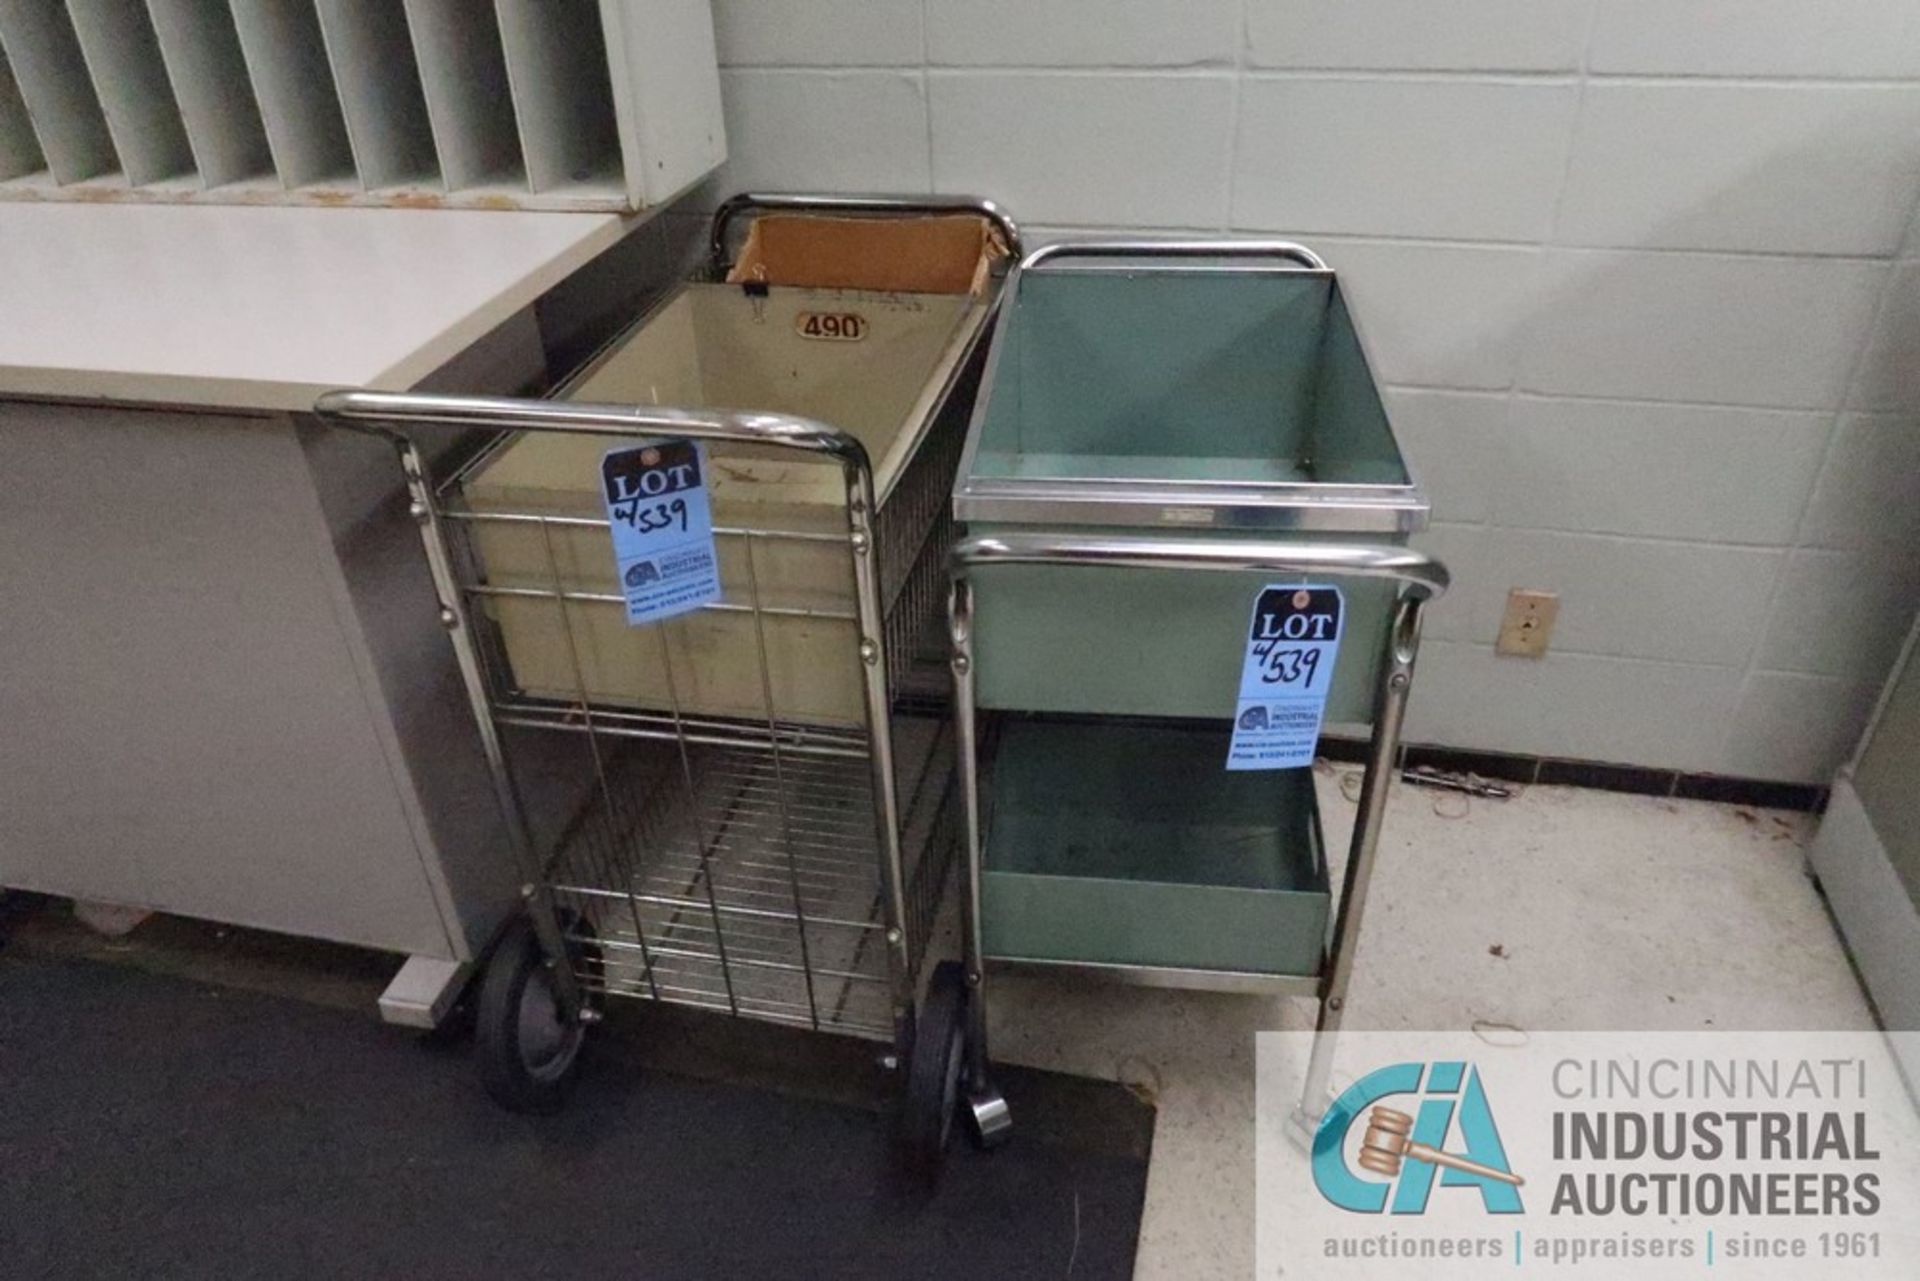 (LOT) MAIL SORTING STATION INCLUDING (2) CARTS, 22-STATION PIGEON HOLE BENCH, 4' TABLE - Image 2 of 4